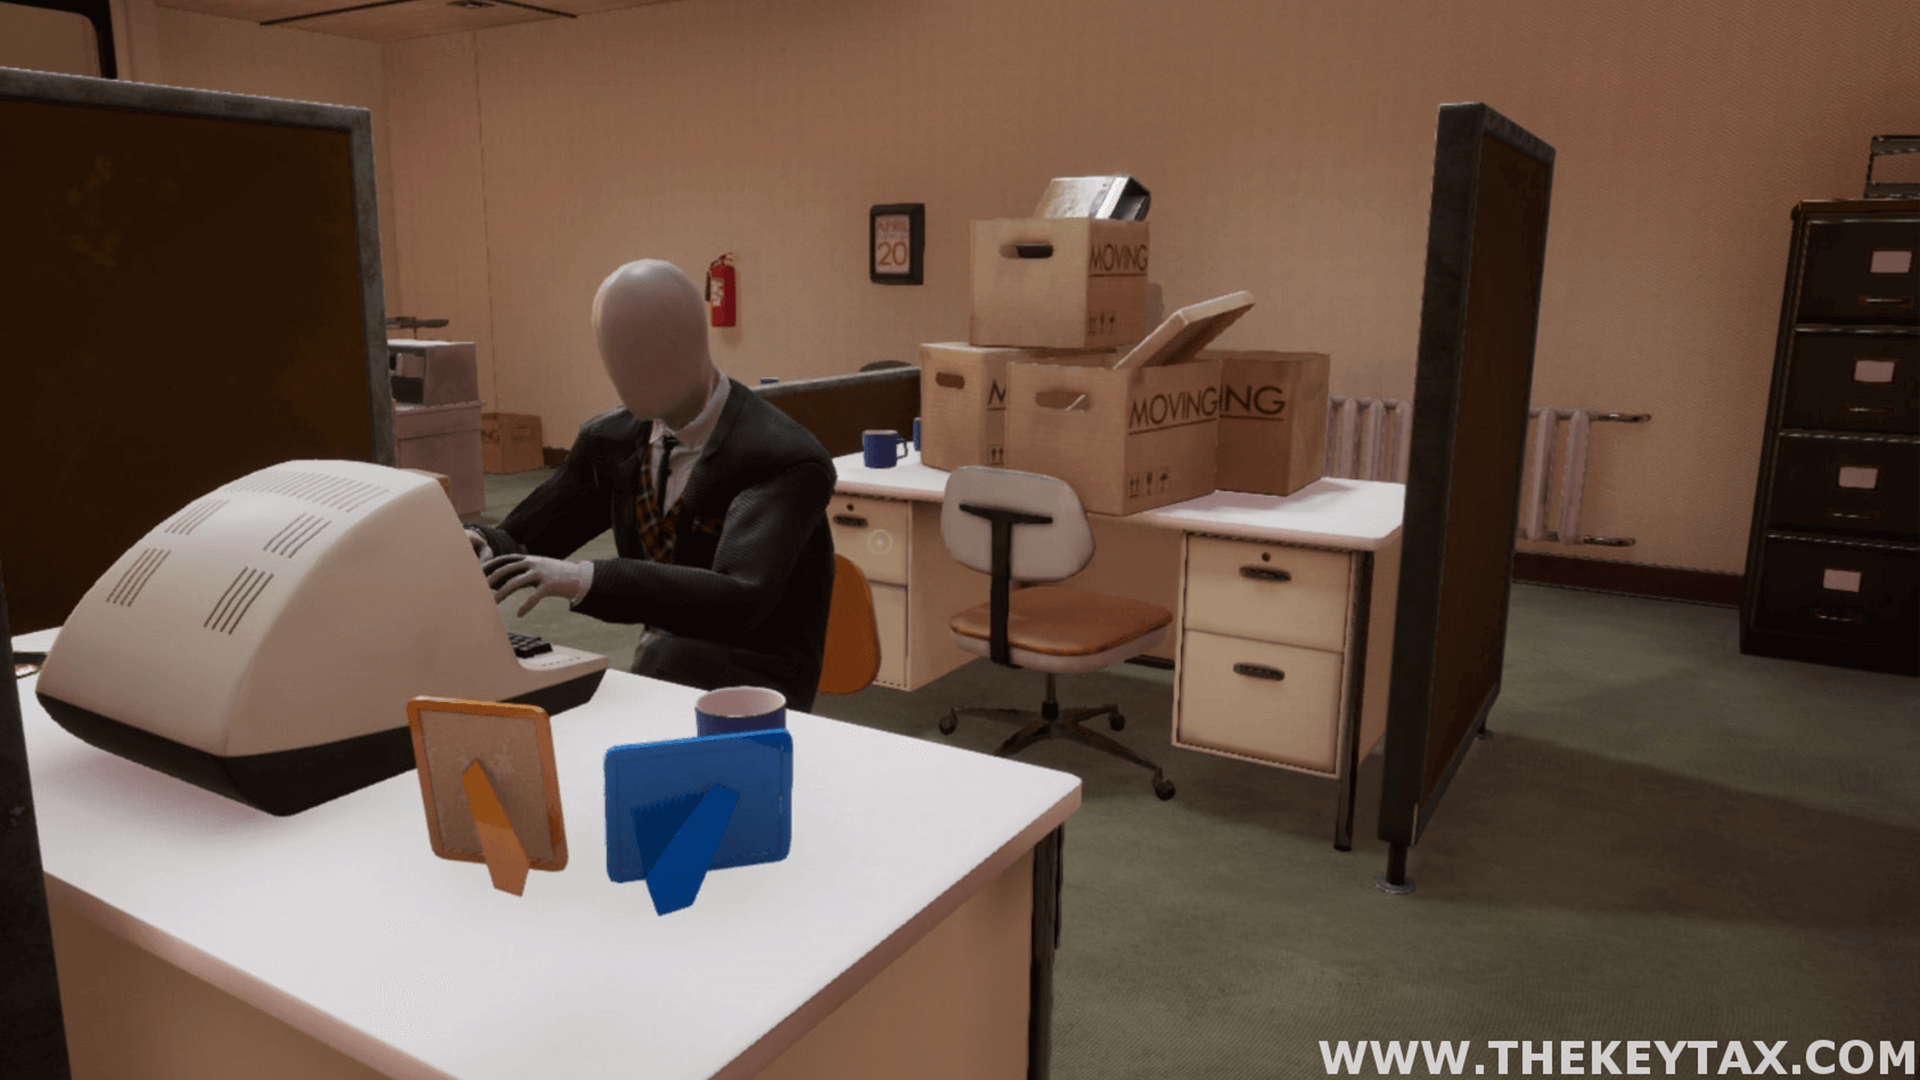 A mannequin is seen sitting at a desk working on a computer, with two picture frames and a cup on their desk.